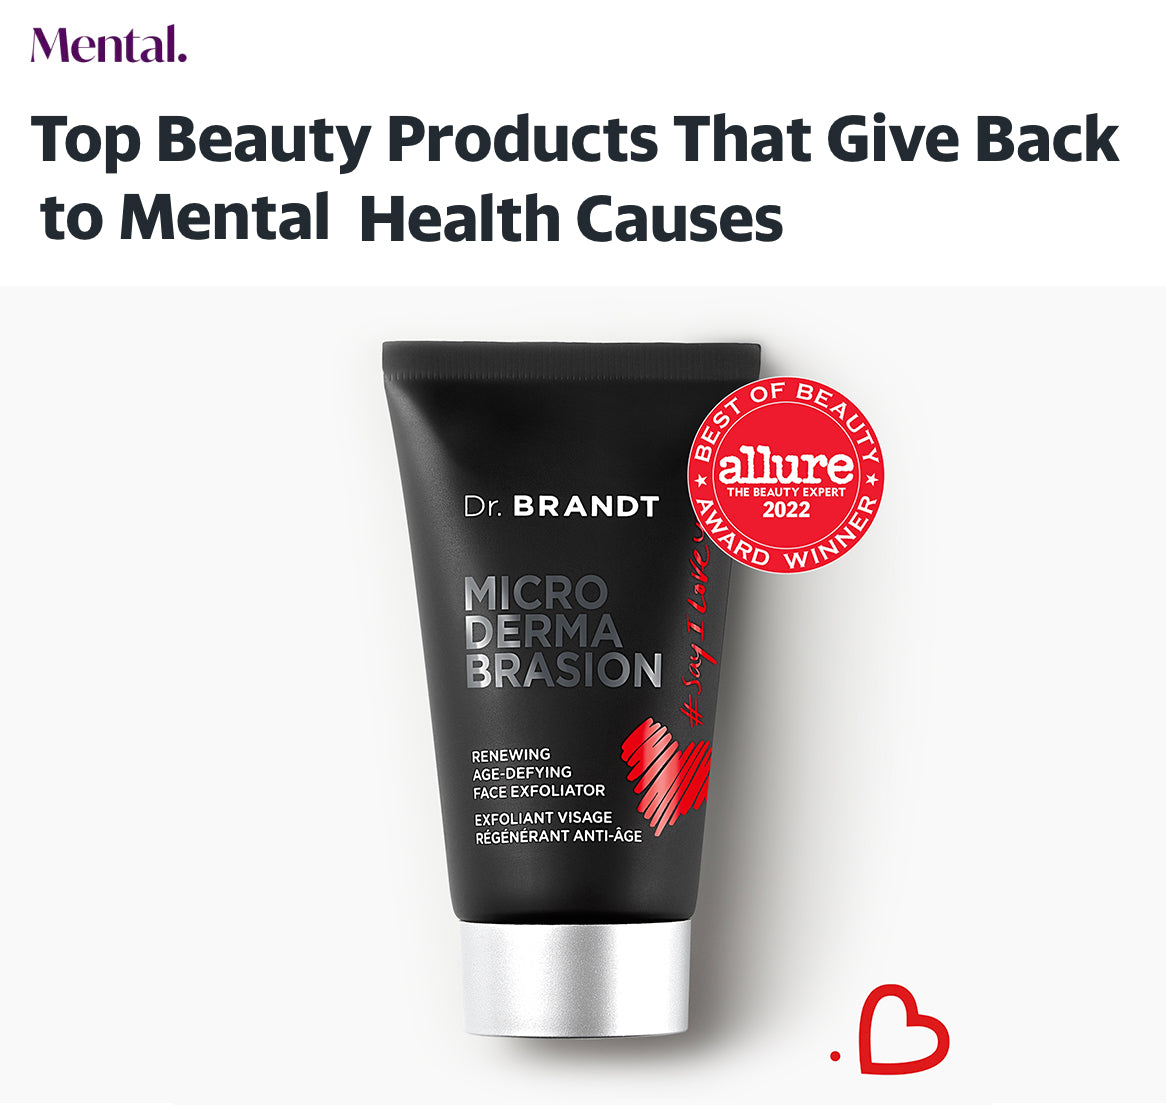 Top Beauty Products That Give Back to Mental Health Causes